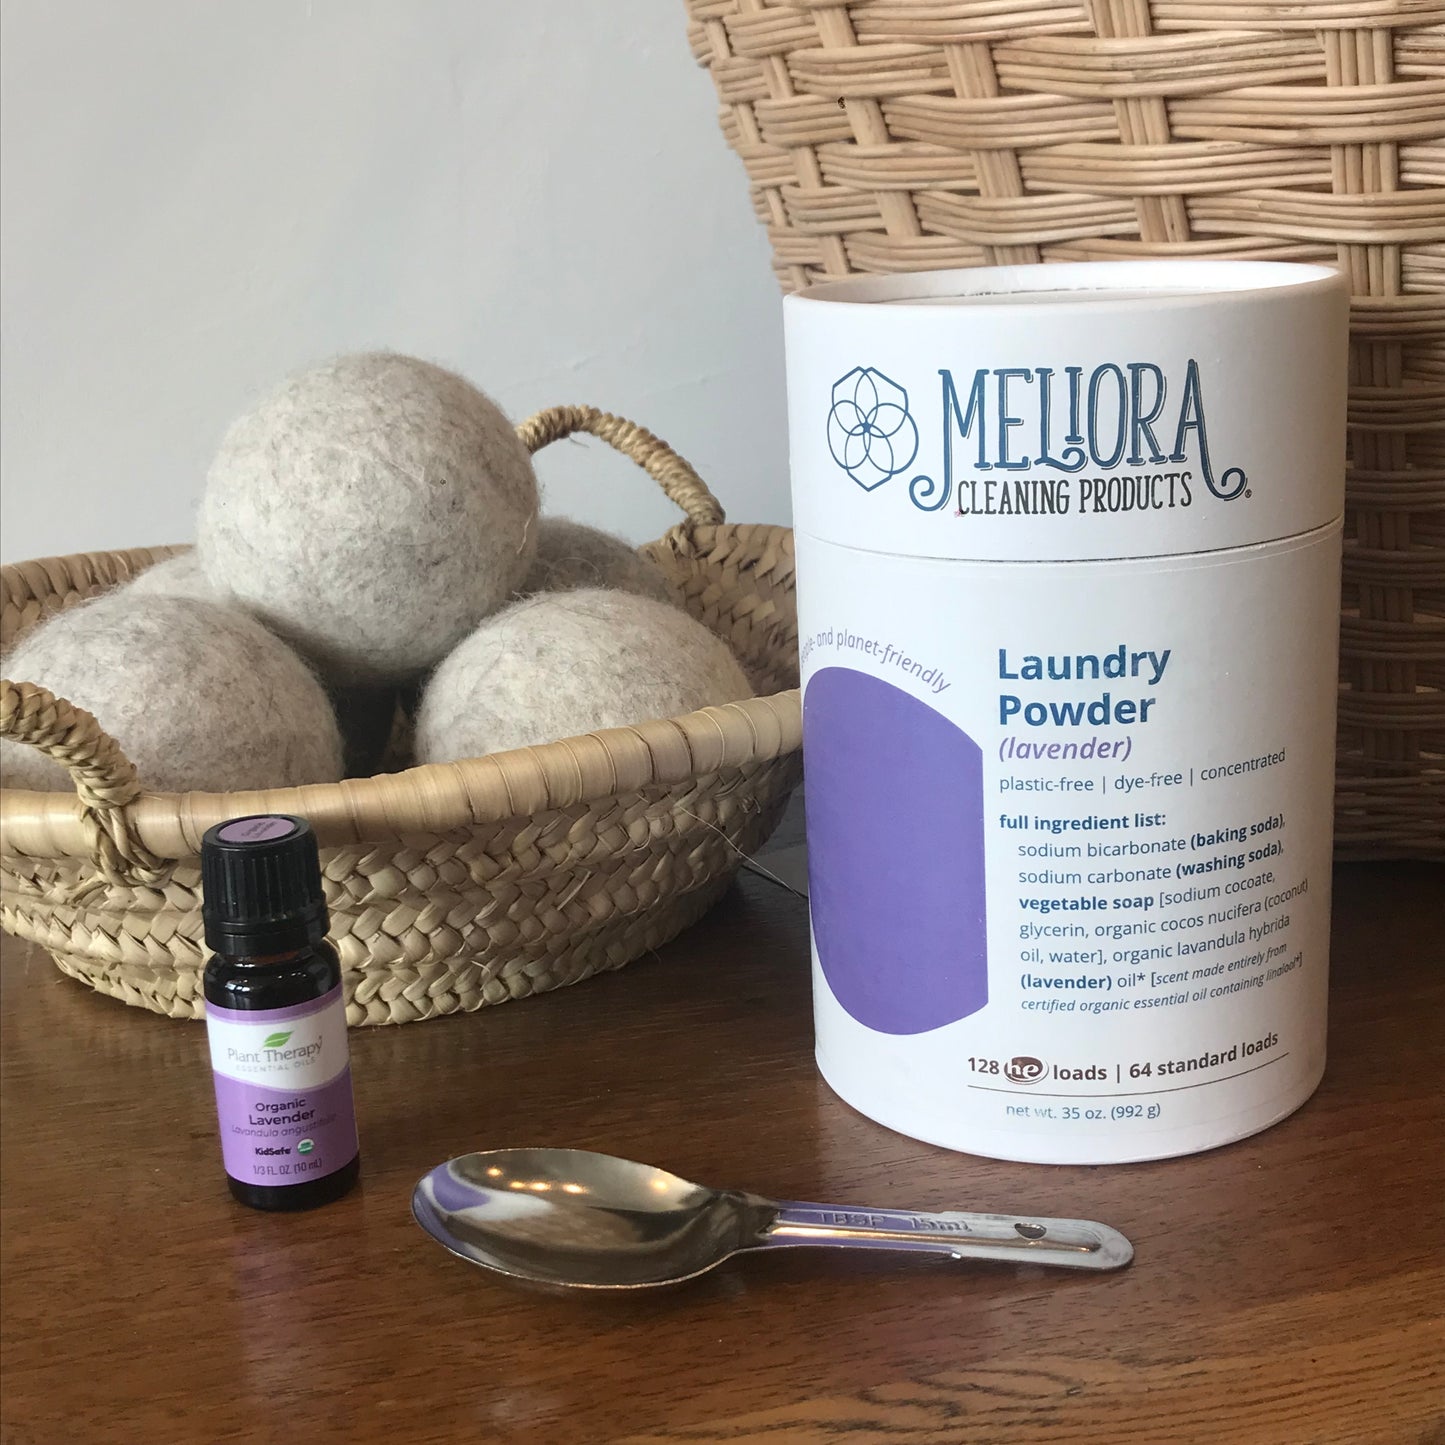 Lavender laundry powder shown with stainless steal scoop (included), wool dryer balls and essential oil